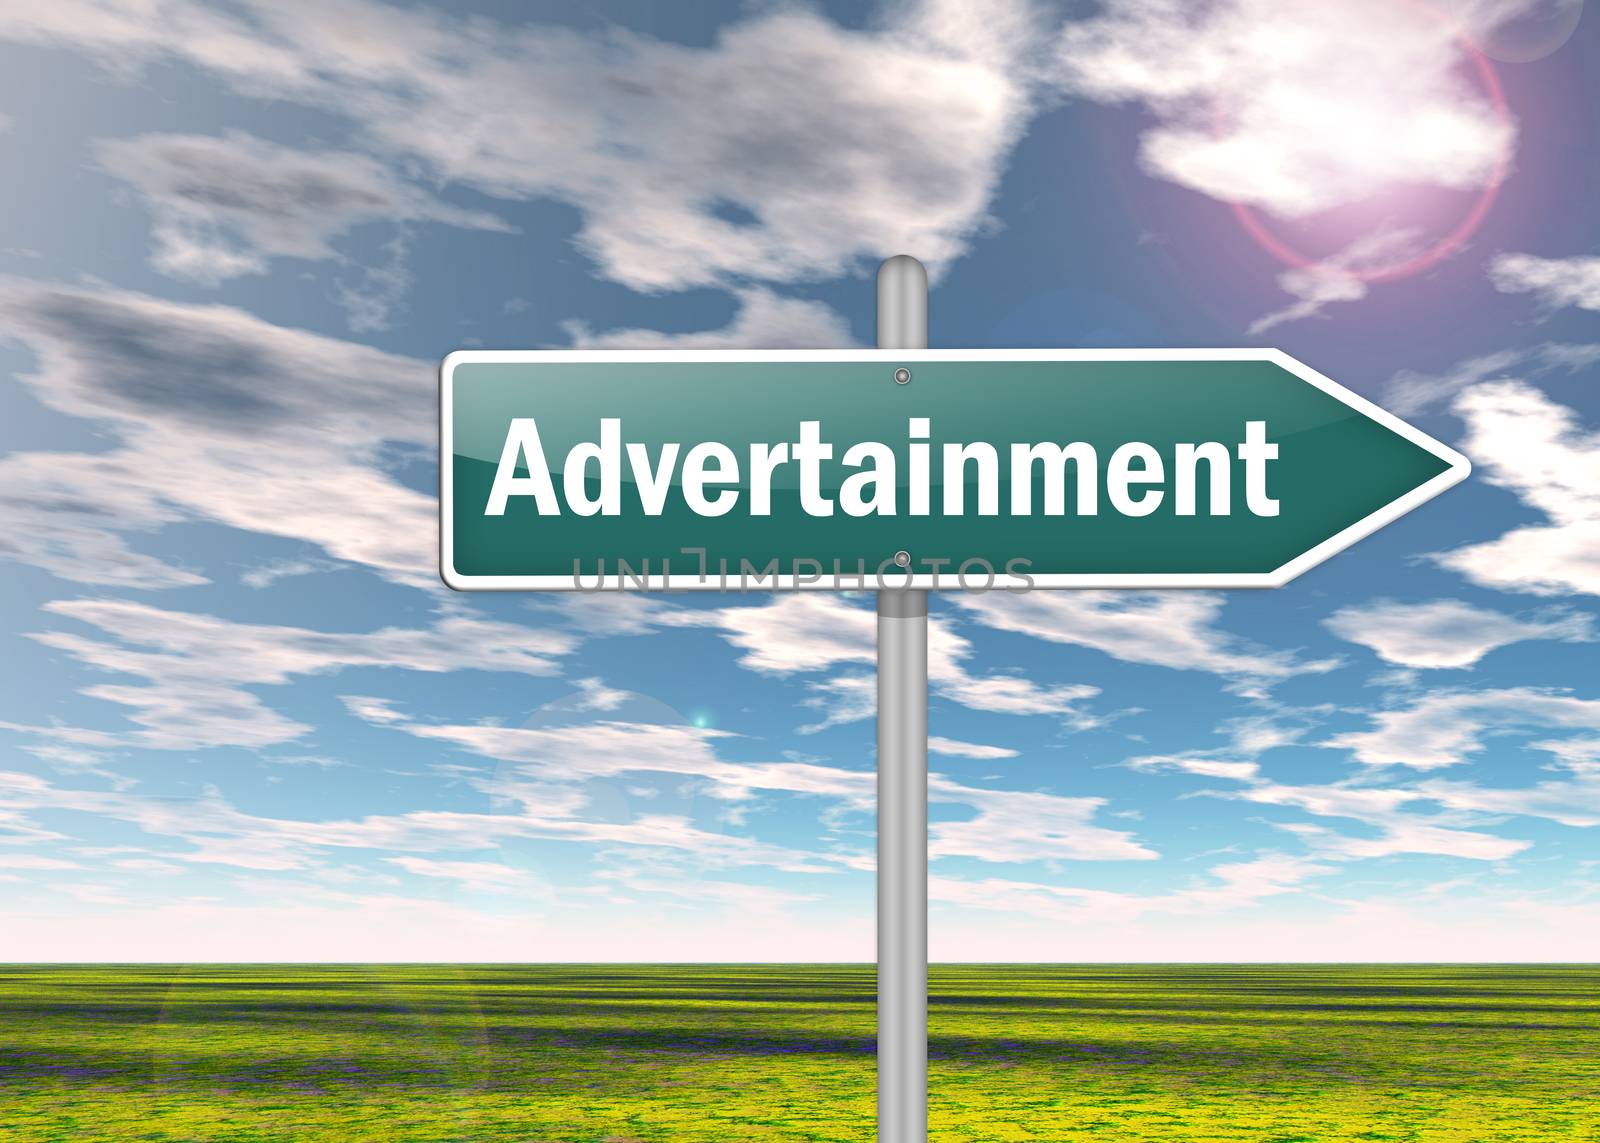 Signpost "Advertainment" by mindscanner